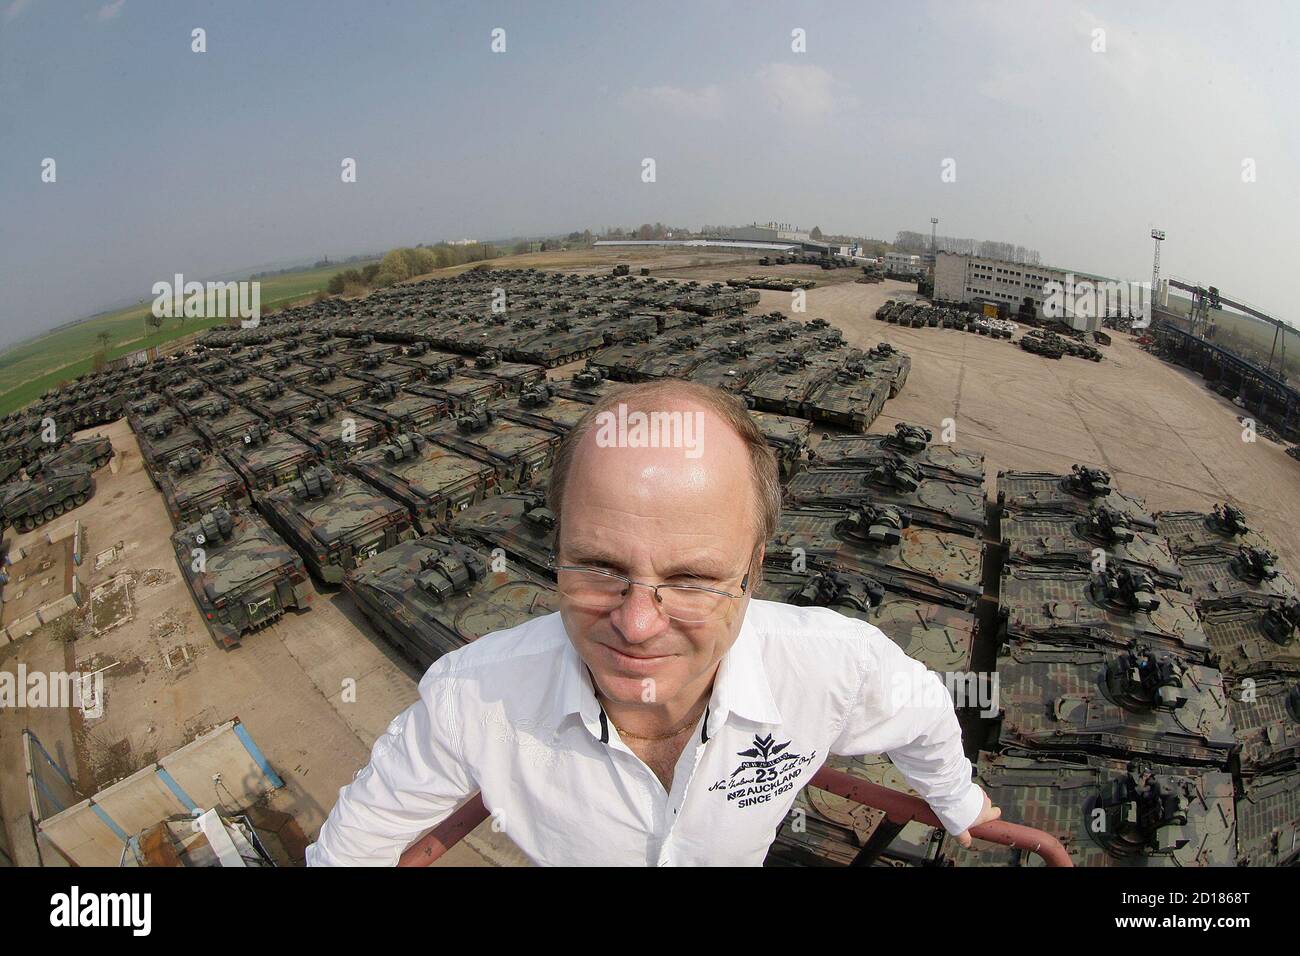 Page 2 - Peter Koch High Resolution Stock Photography and Images - Alamy